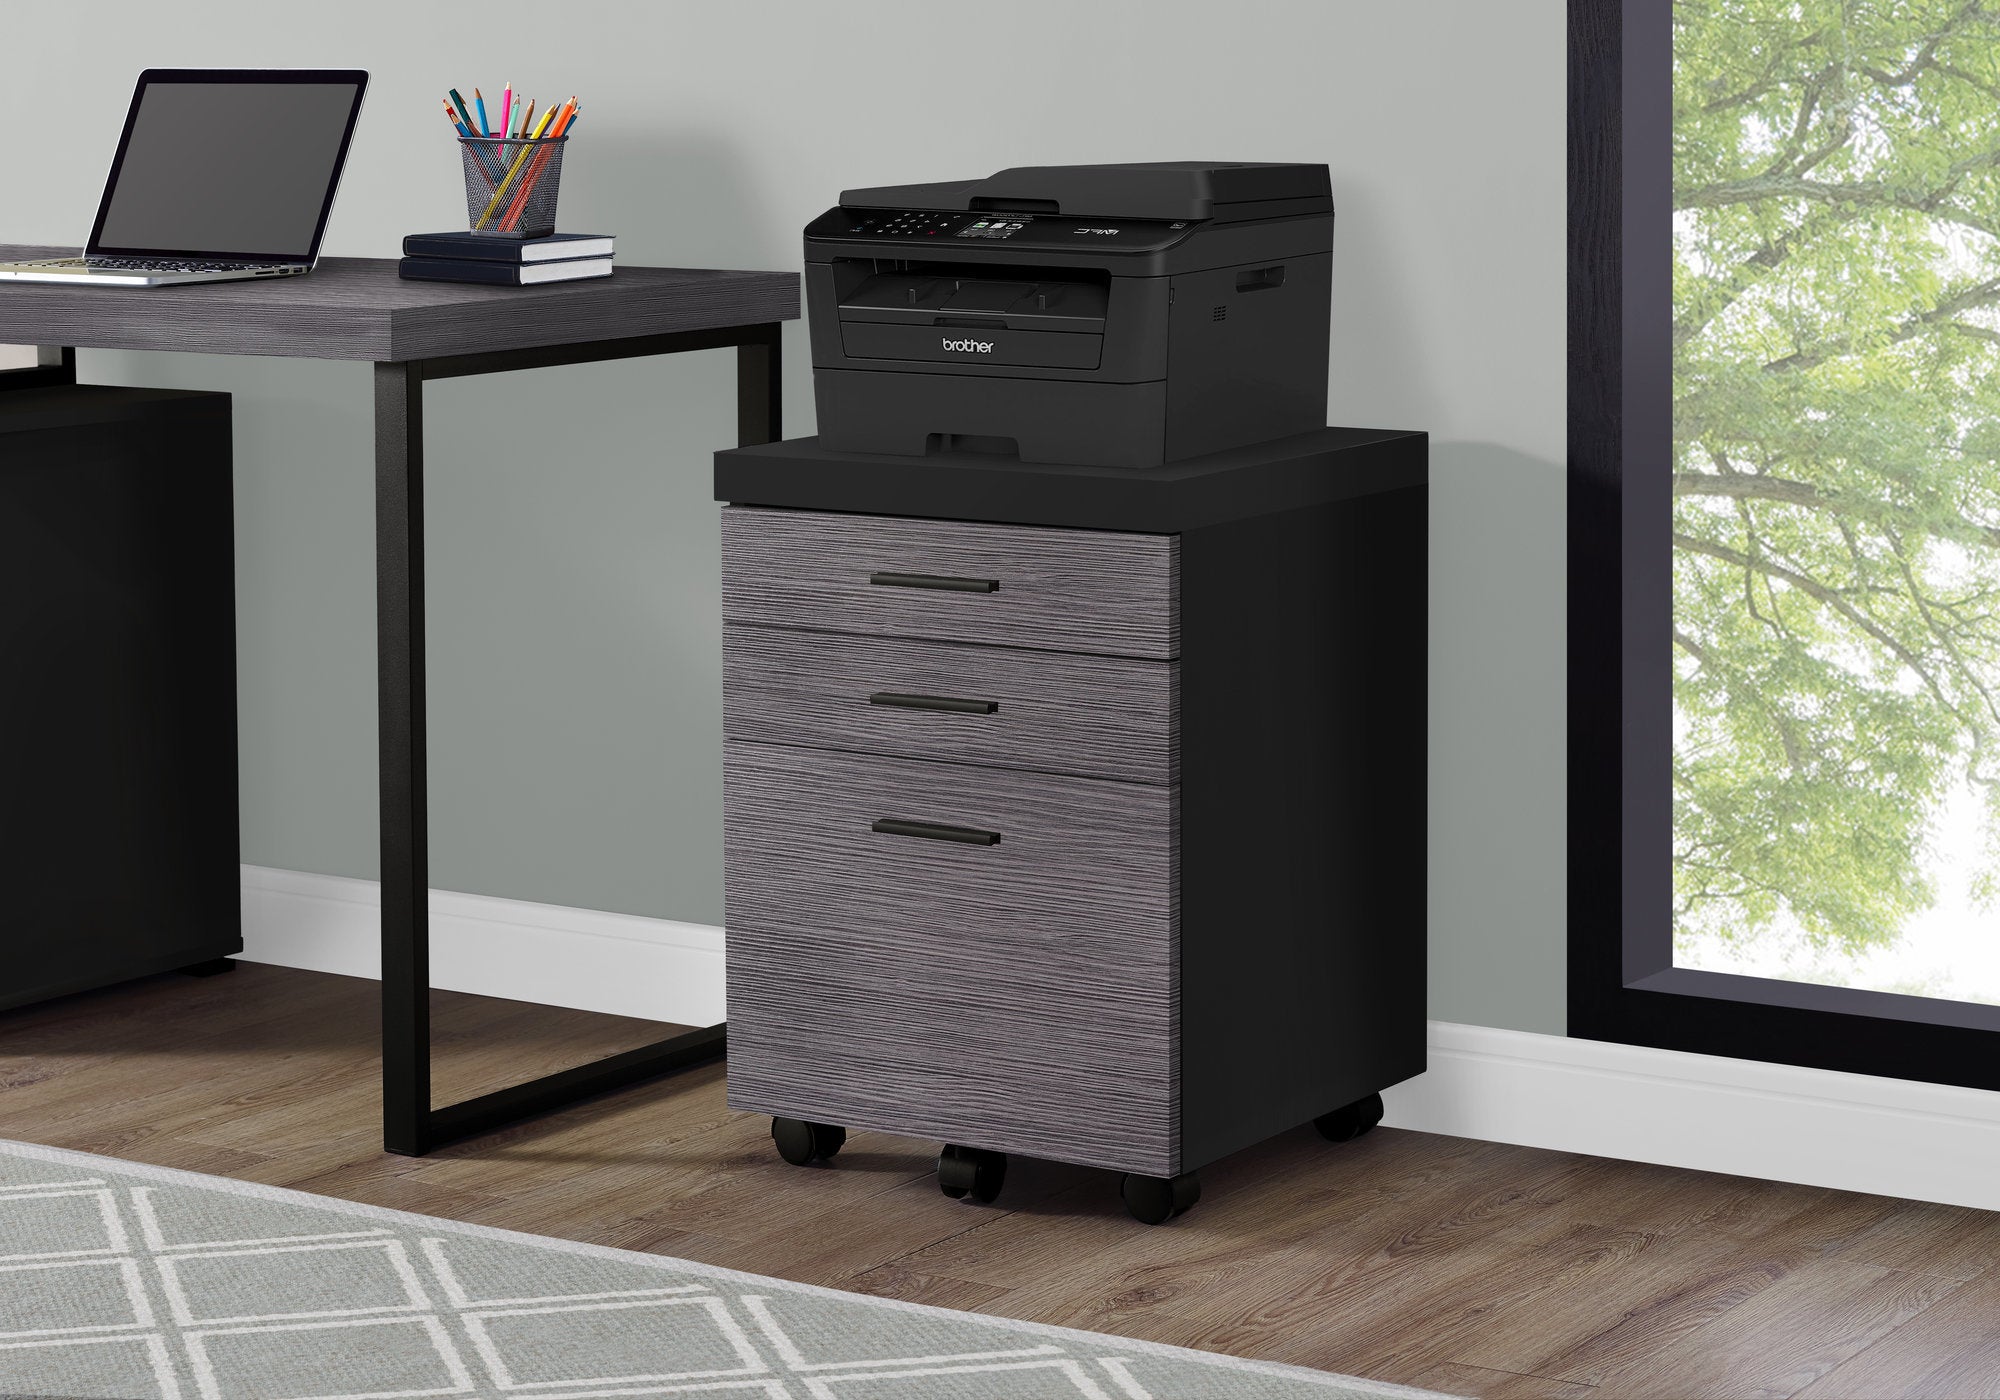 MN-697403    File Cabinet, Rolling Mobile, Storage, Printer Stand, Wood File Cabinet, Office, Mdf, Black, Contemporary, Modern